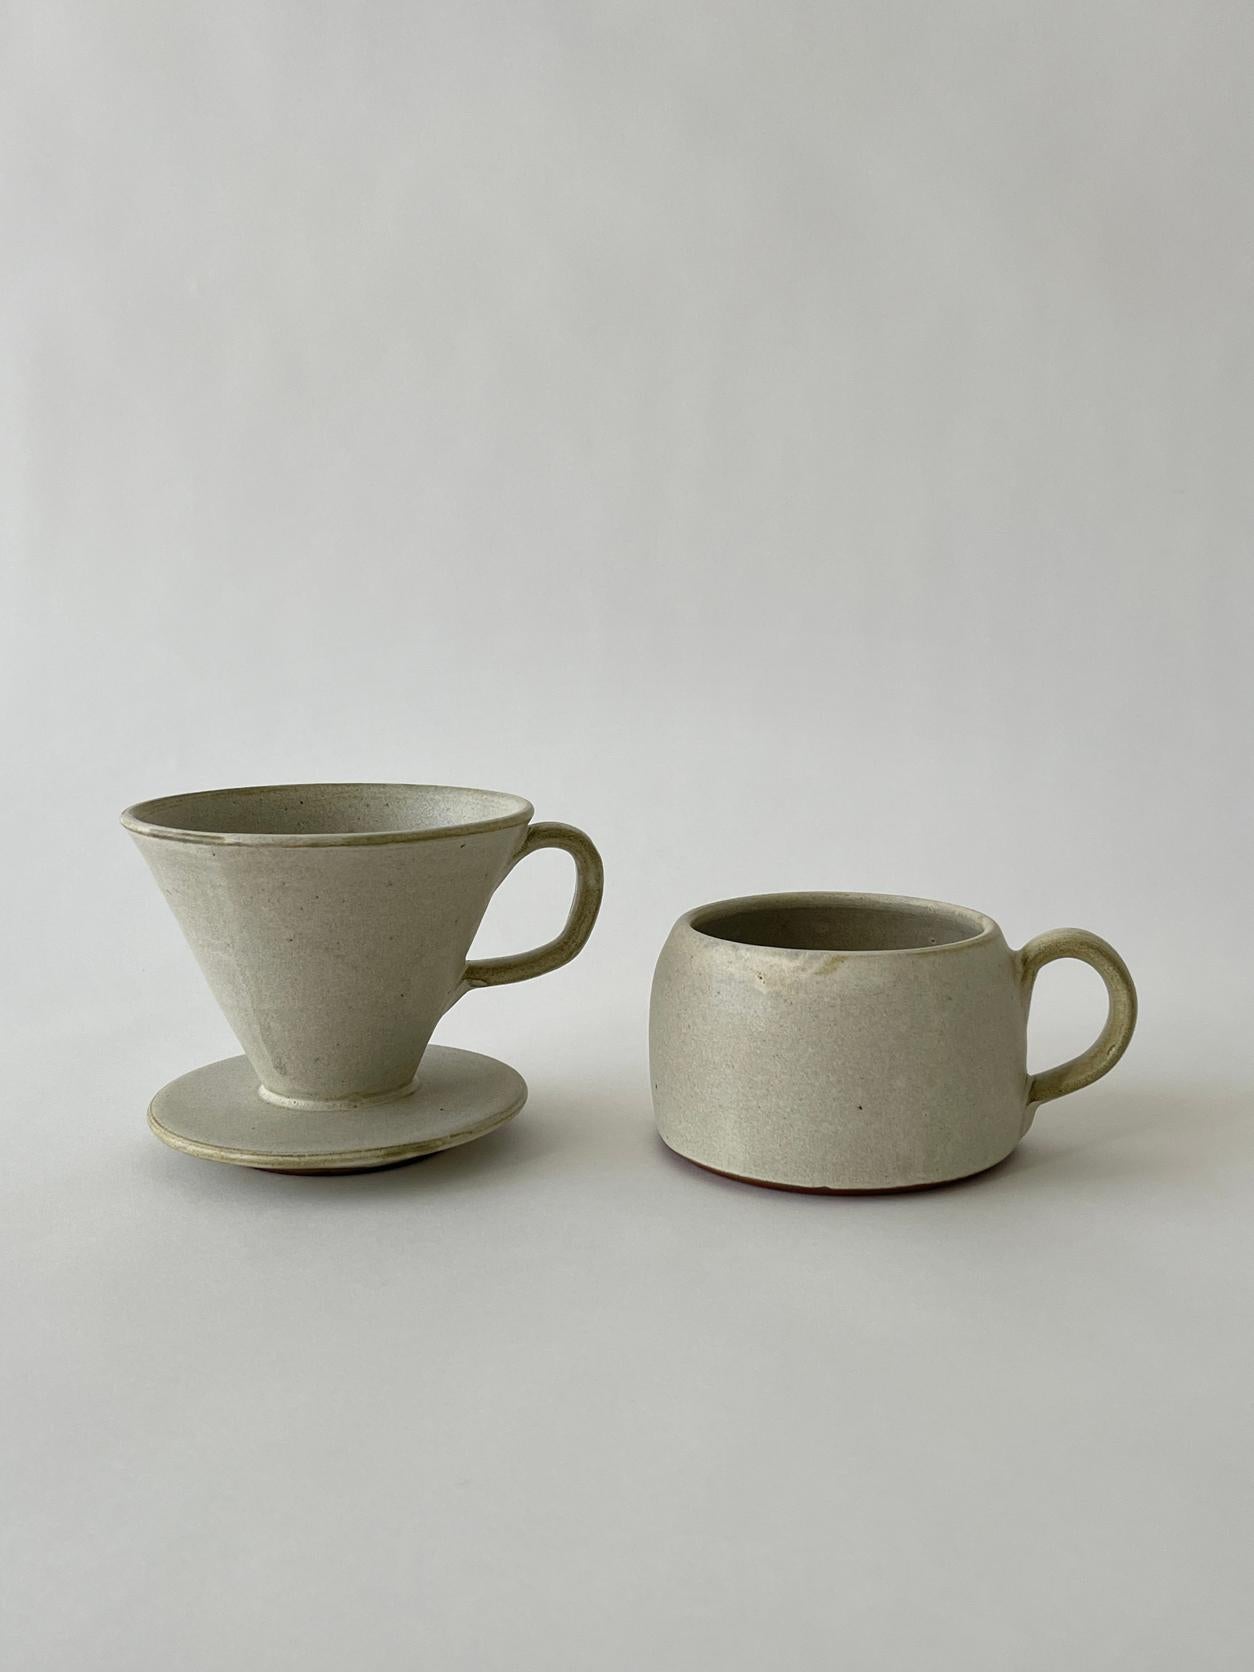 20th century Ceramic pour over set in a neutral light matte grey speckled color. Beautiful piece for your morning routine. Perfect for display.

Measures: 5.5